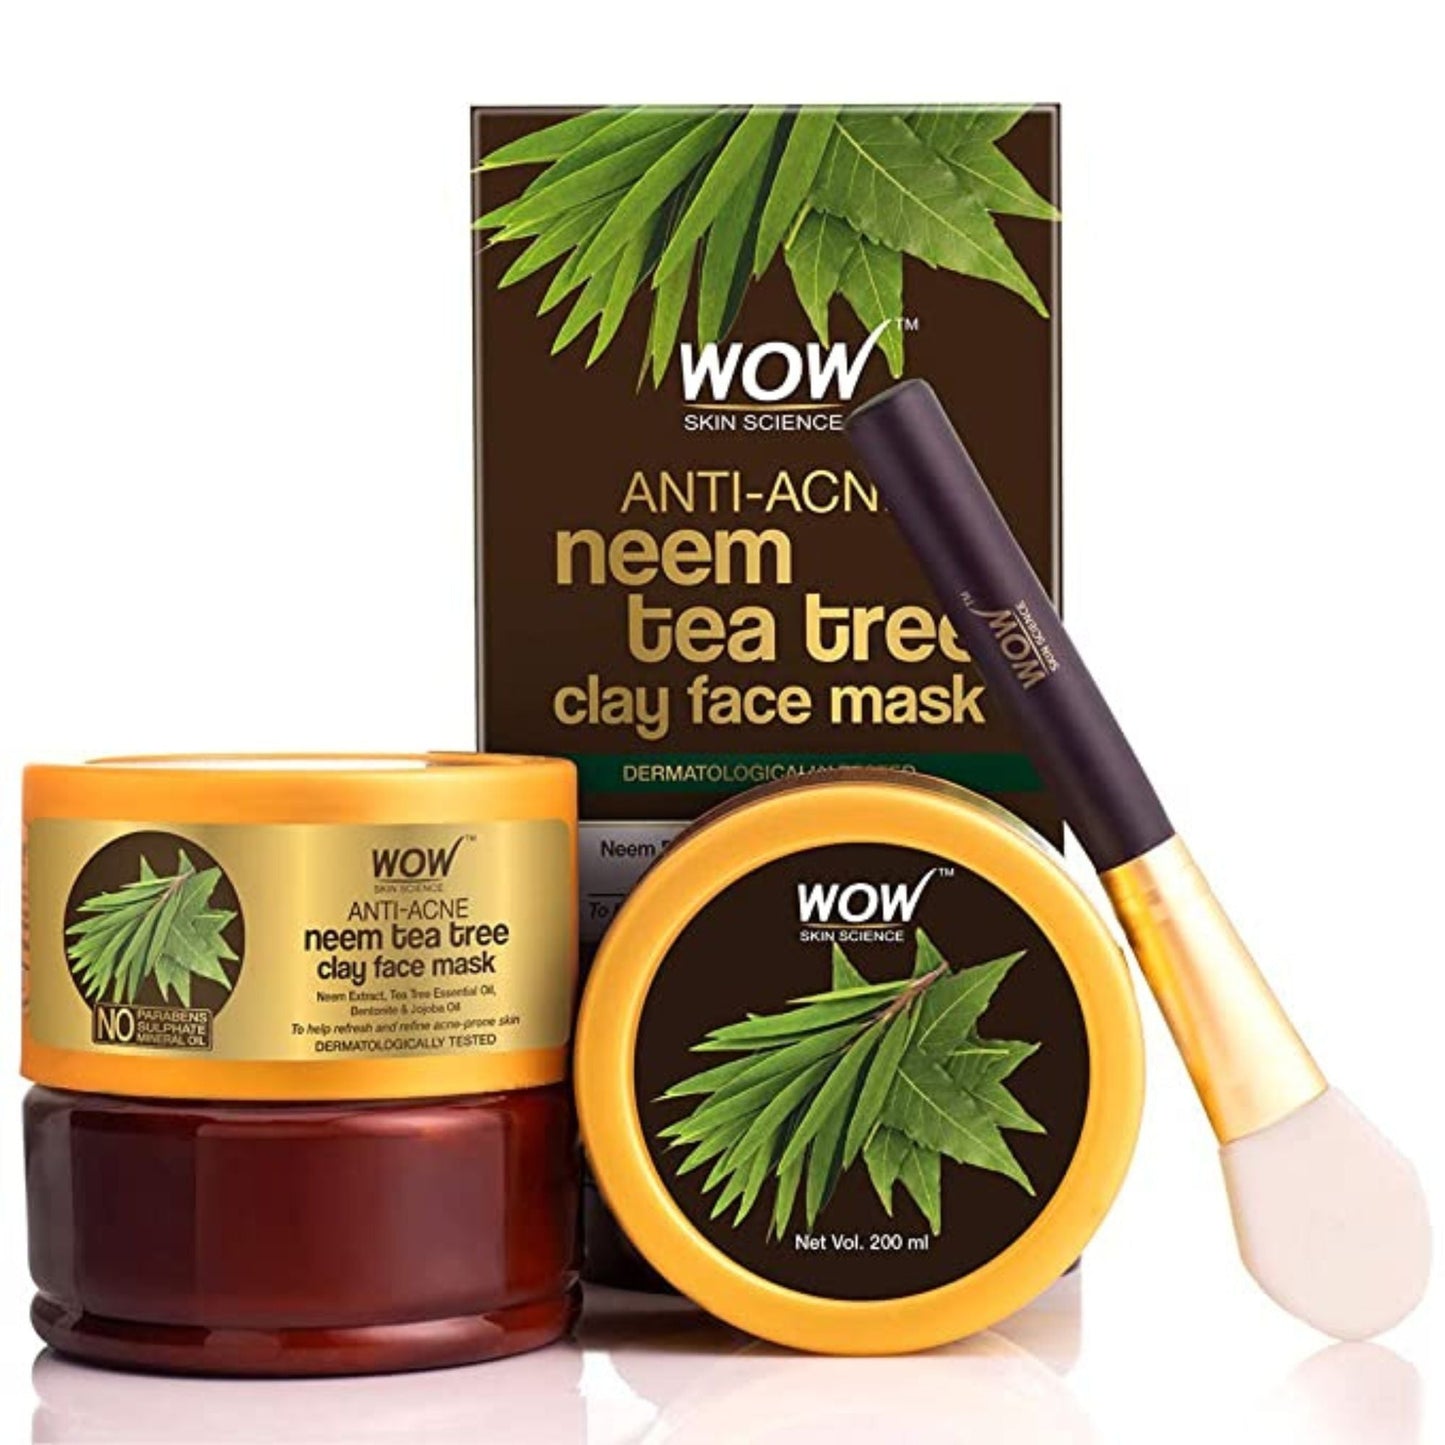 WOW Skin Science Anti-Acne Neem & Tea Tree Clay Face Mask for Refreshing & Refining Acne Prone Skin - For All Skin Types - No Parabens, Sulphate & Mineral Oil, 200 ml